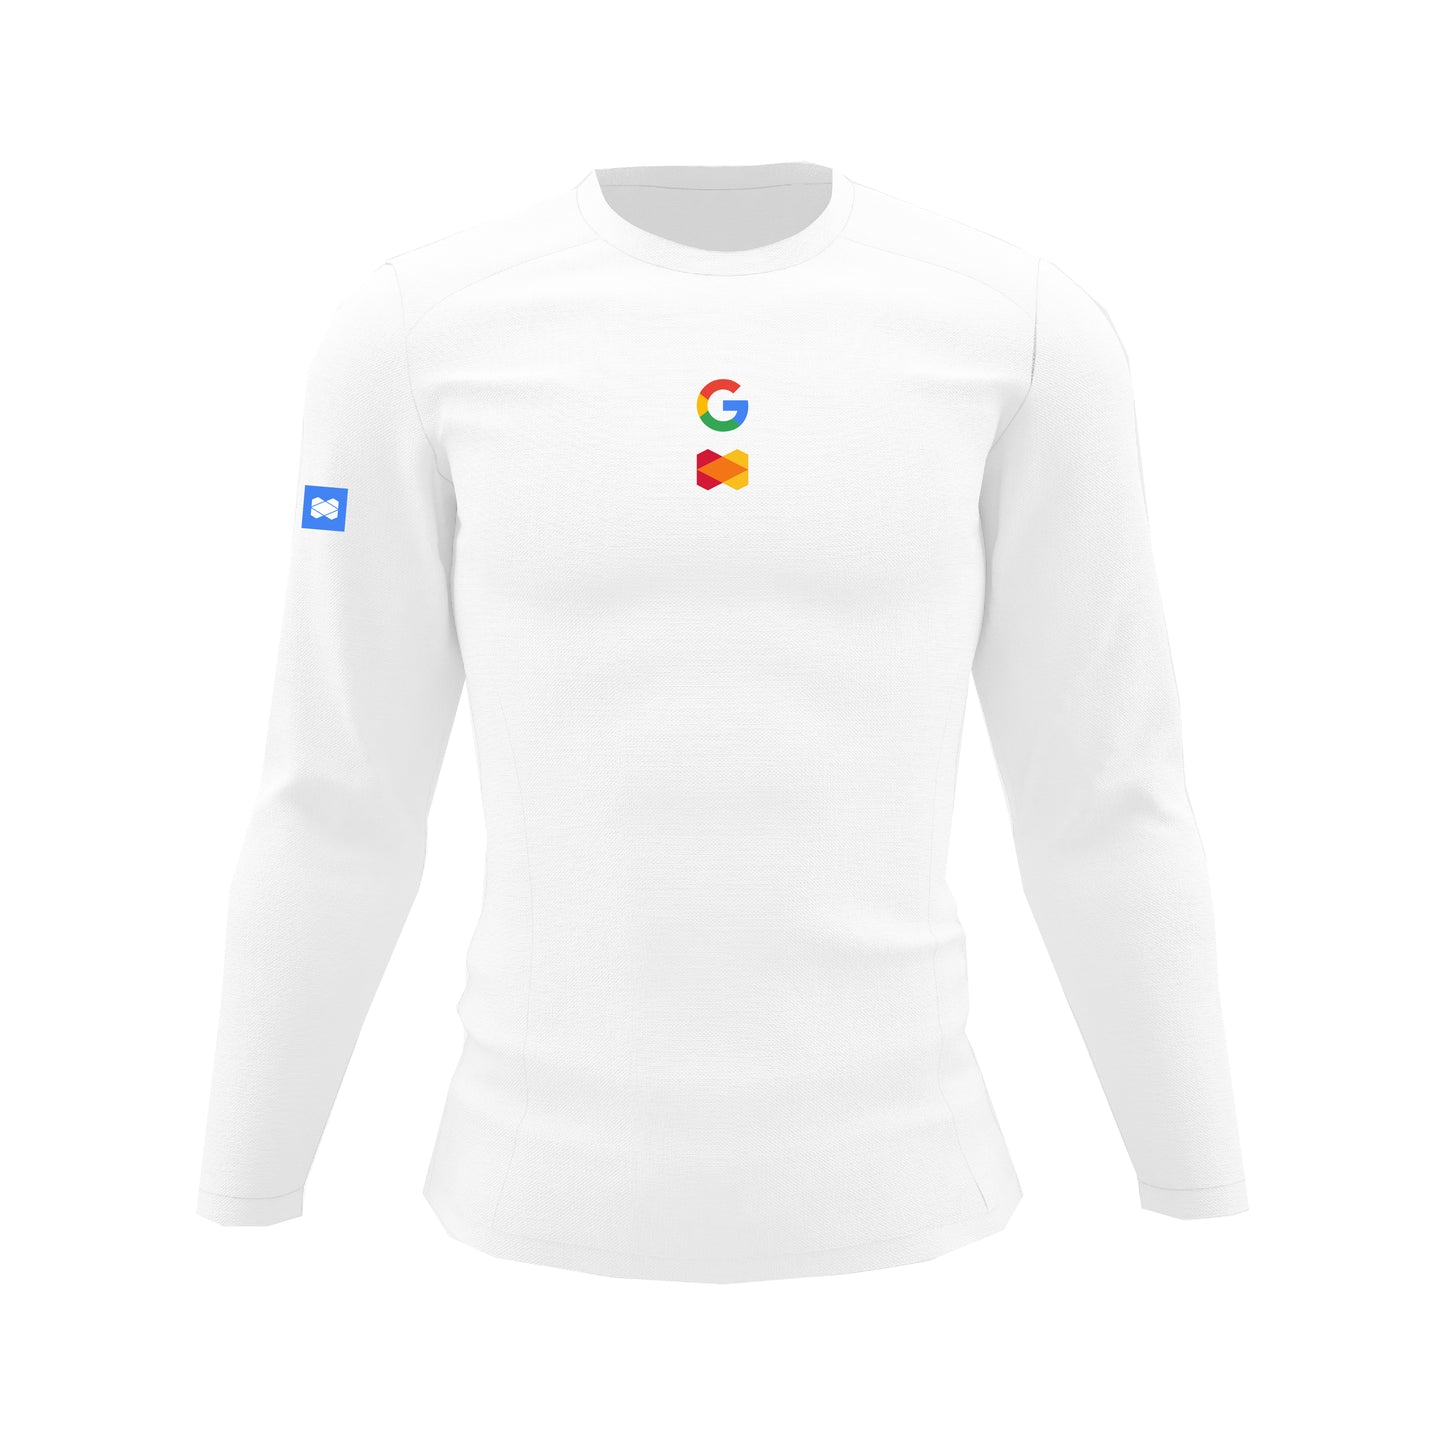 Google - Robot Force ® Sweatshirt by Athletic Forces -  Model 2